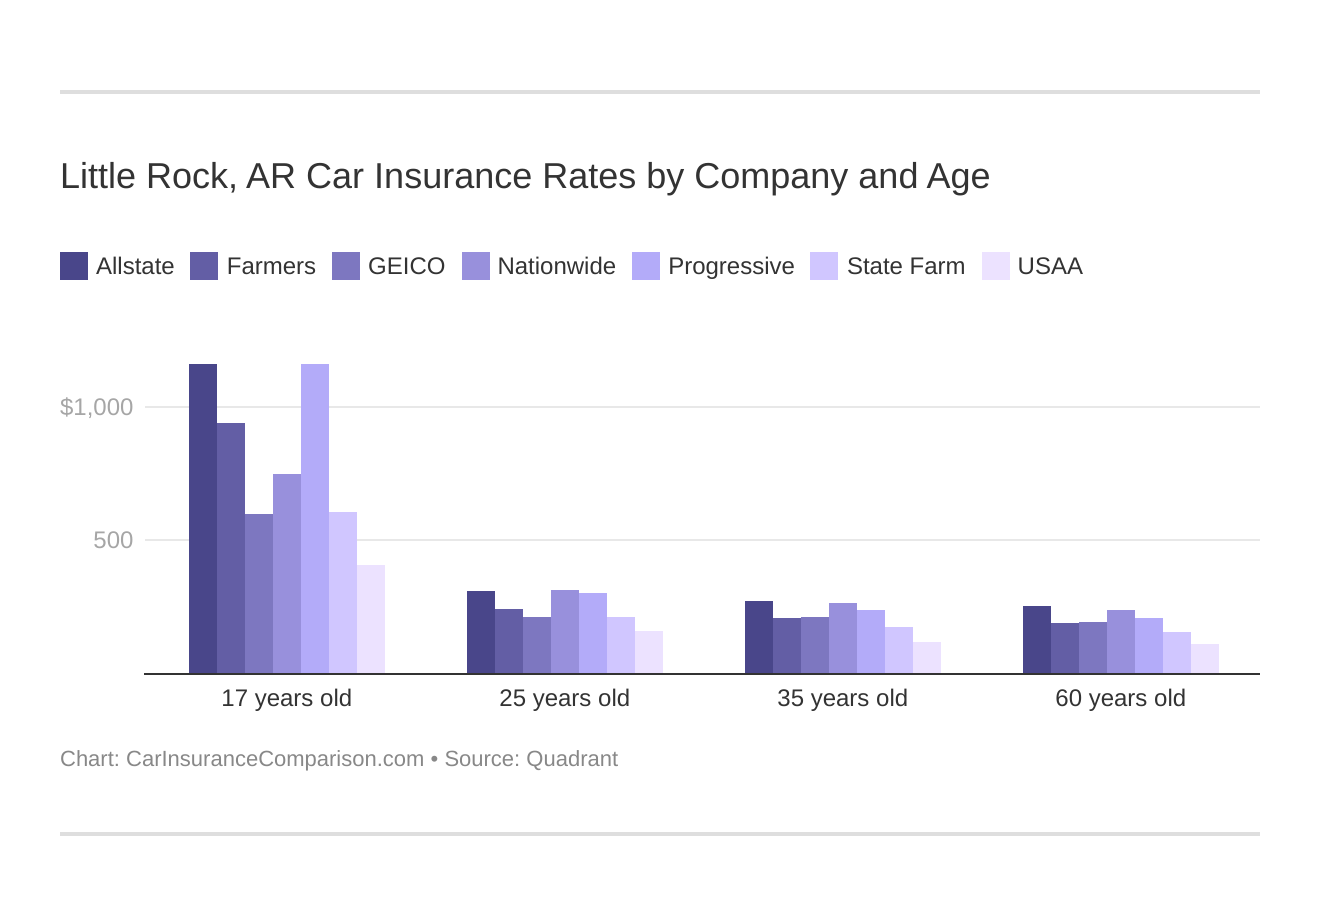 Little Rock, AR Car Insurance Rates by Company and Age